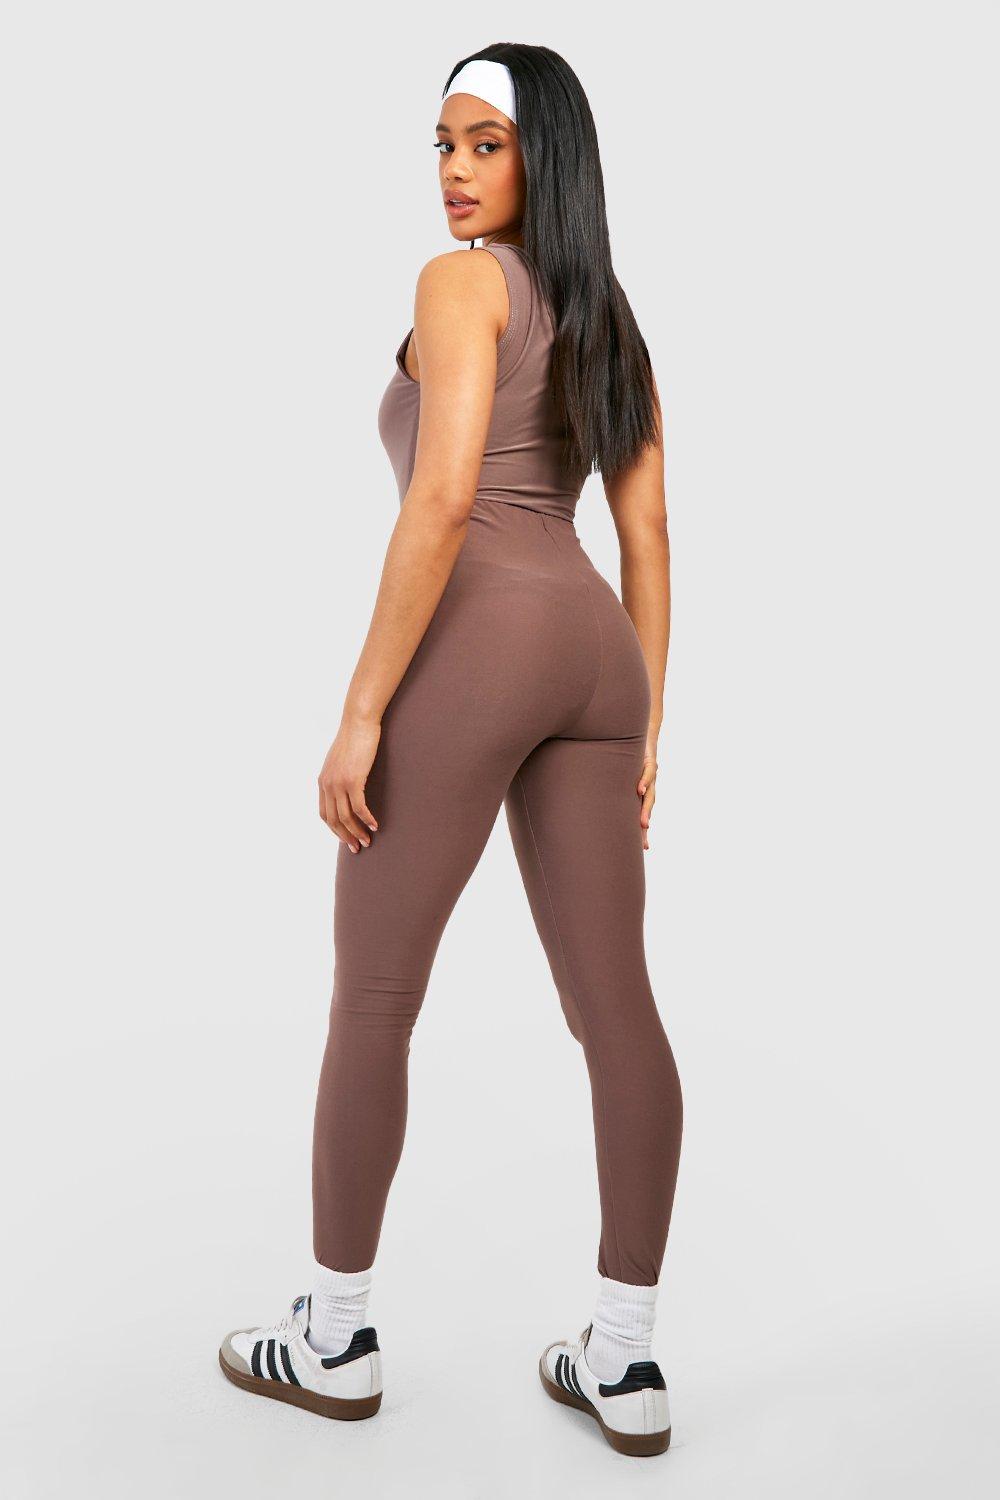 SOFT TOUCH LEGGINGS - taupe brown